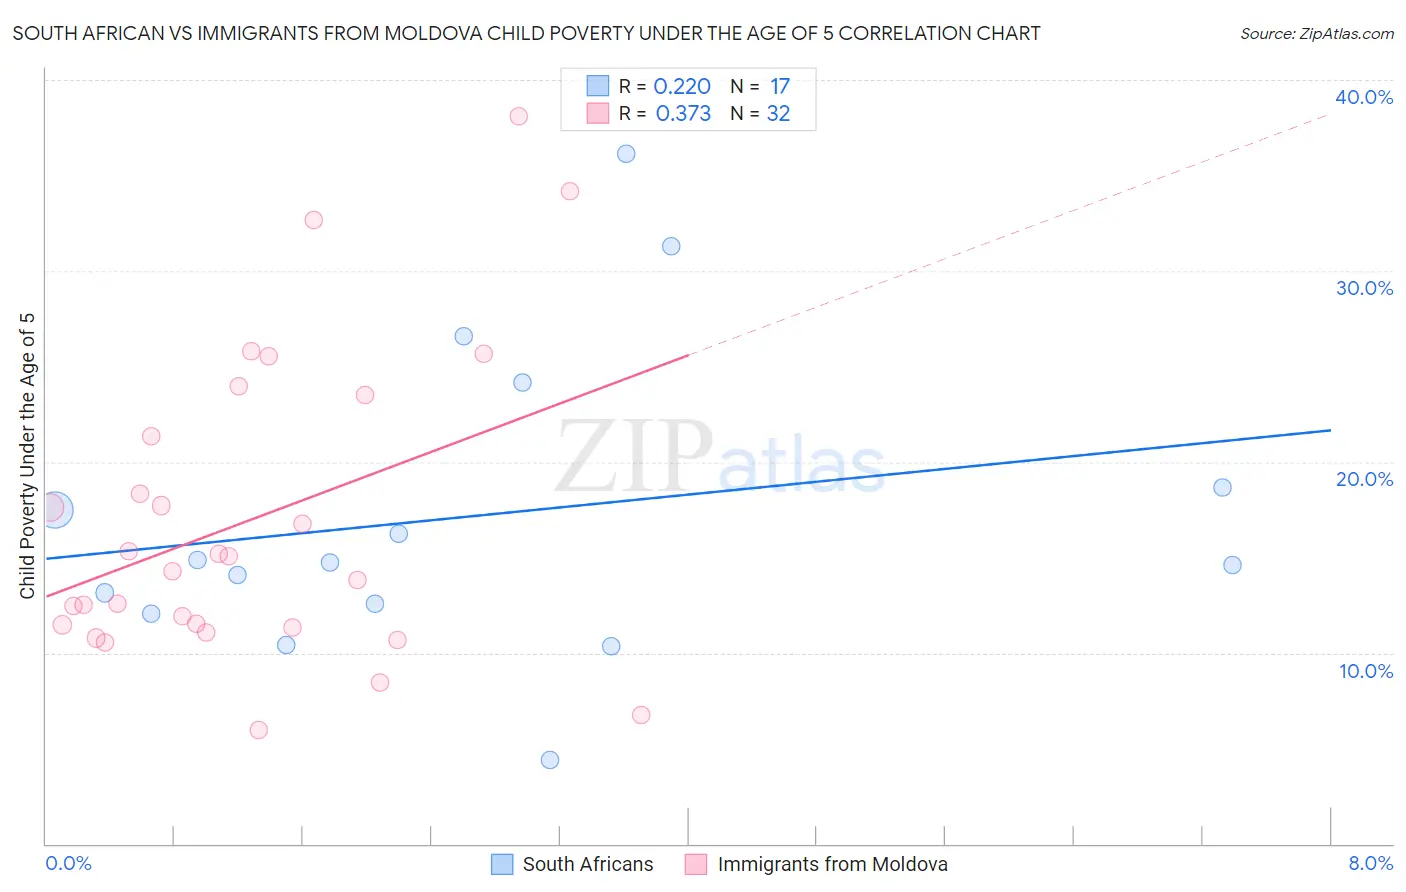 South African vs Immigrants from Moldova Child Poverty Under the Age of 5